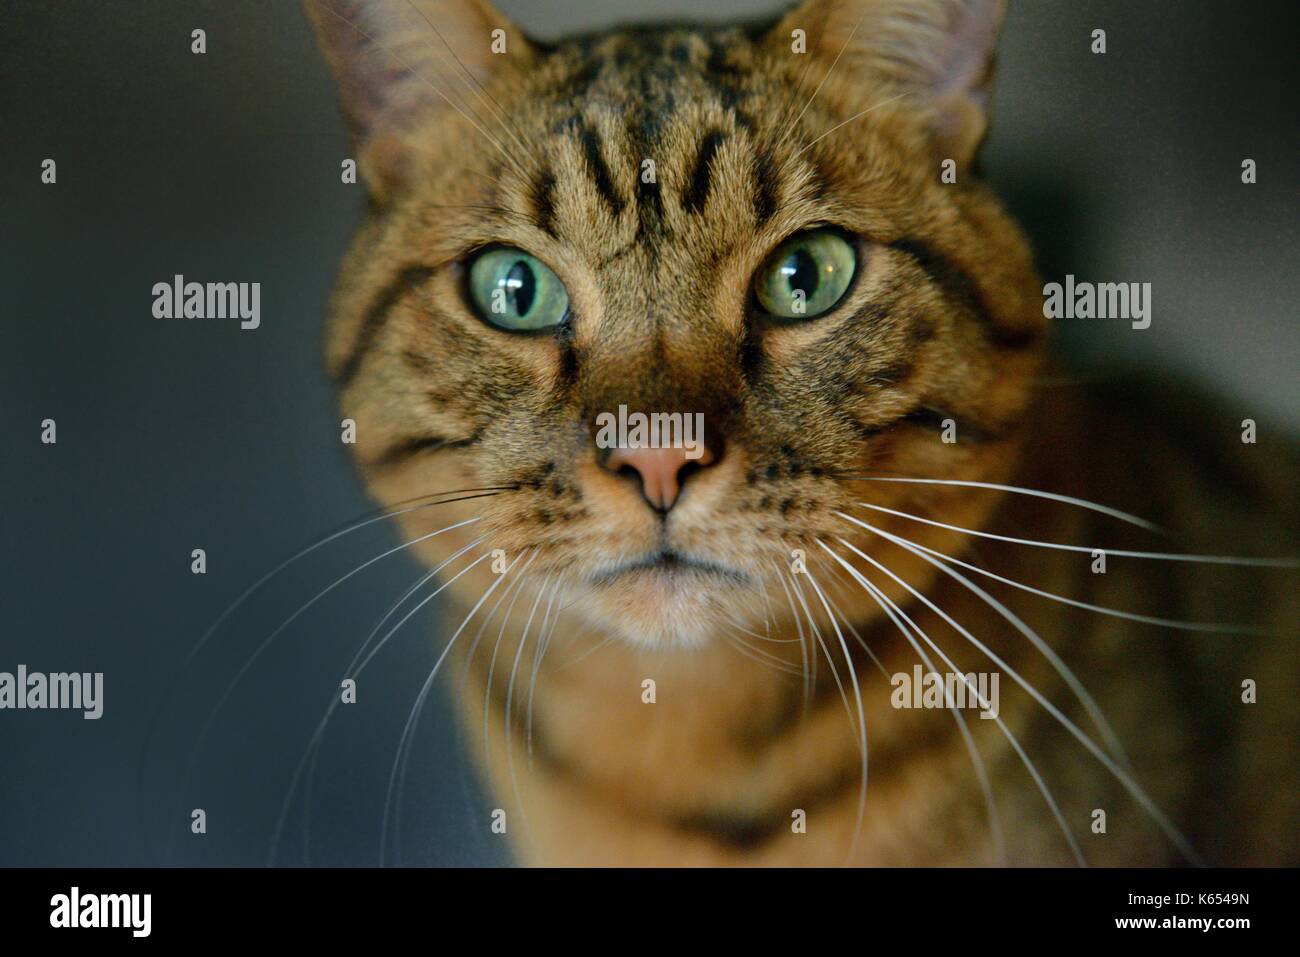 Tabby cat brown close up Foto Stock